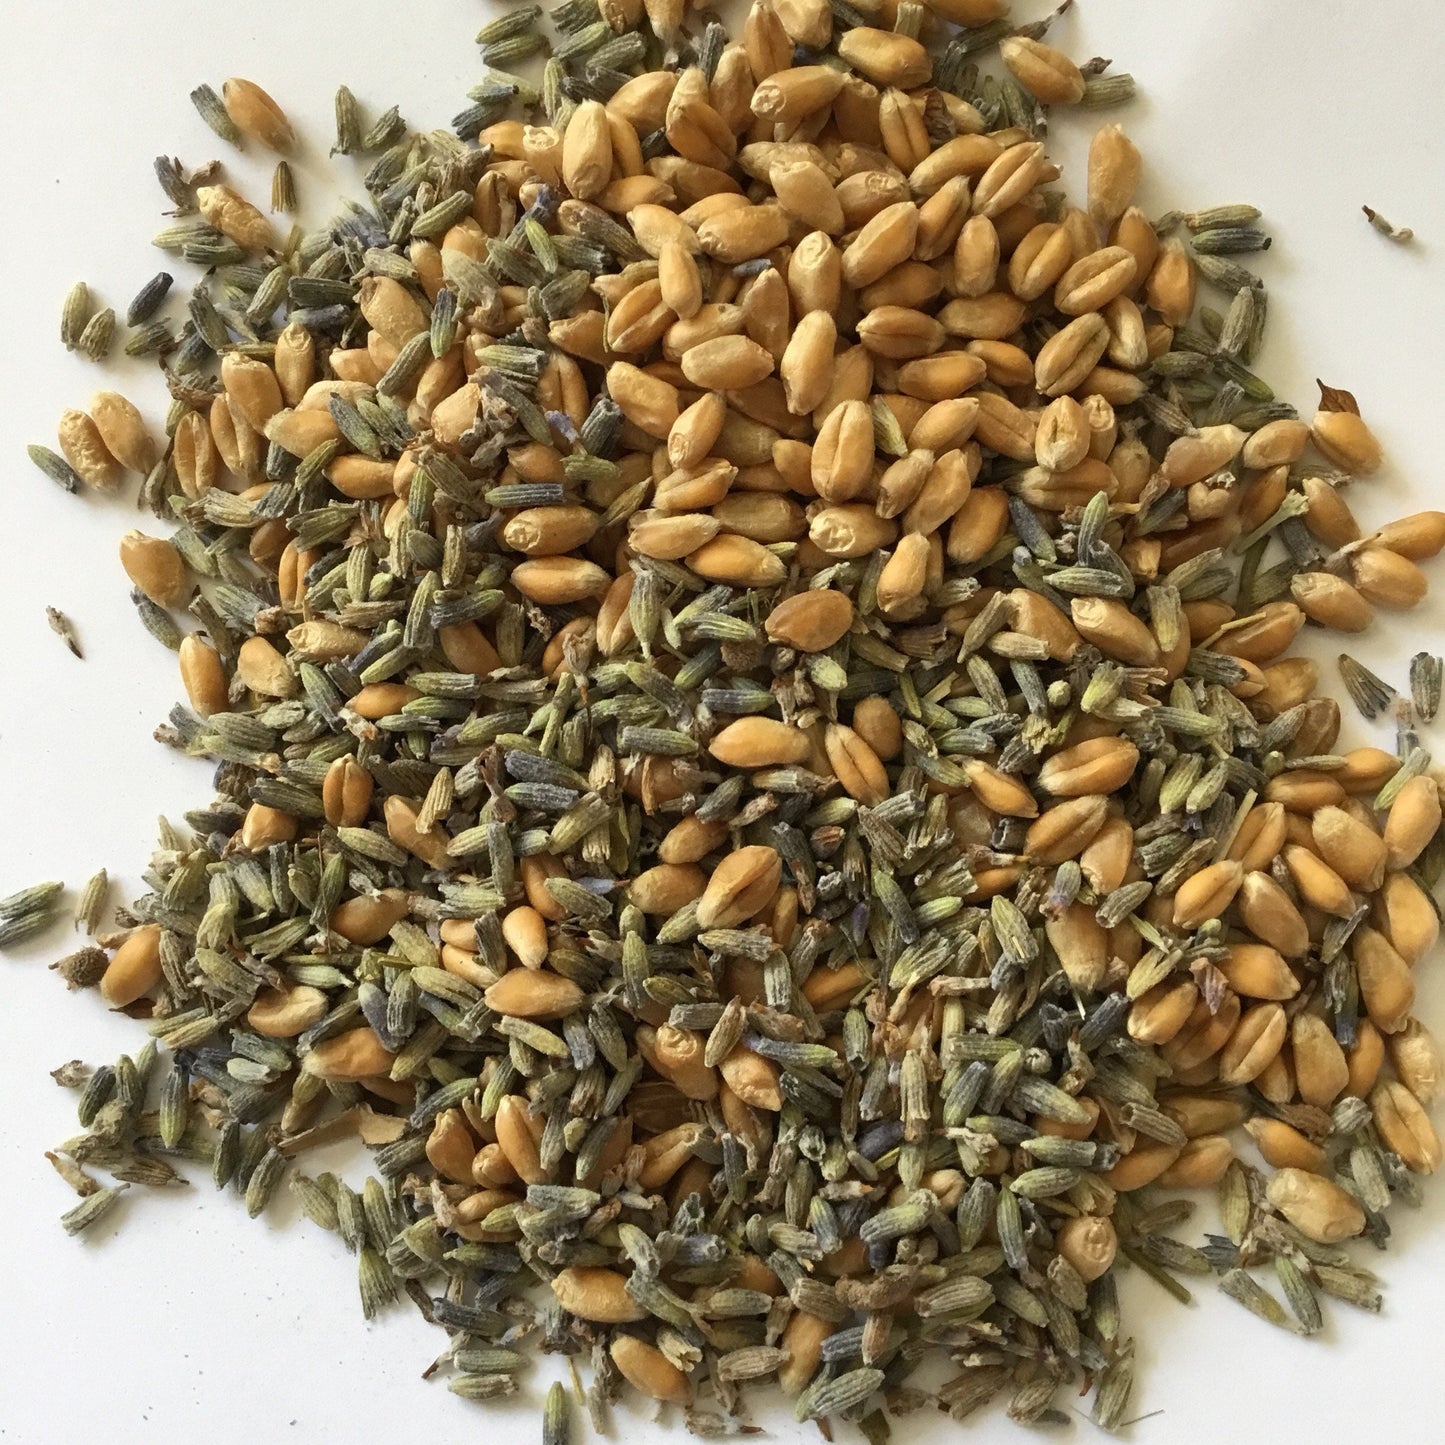 Ingredients of lavender for the wheatbags